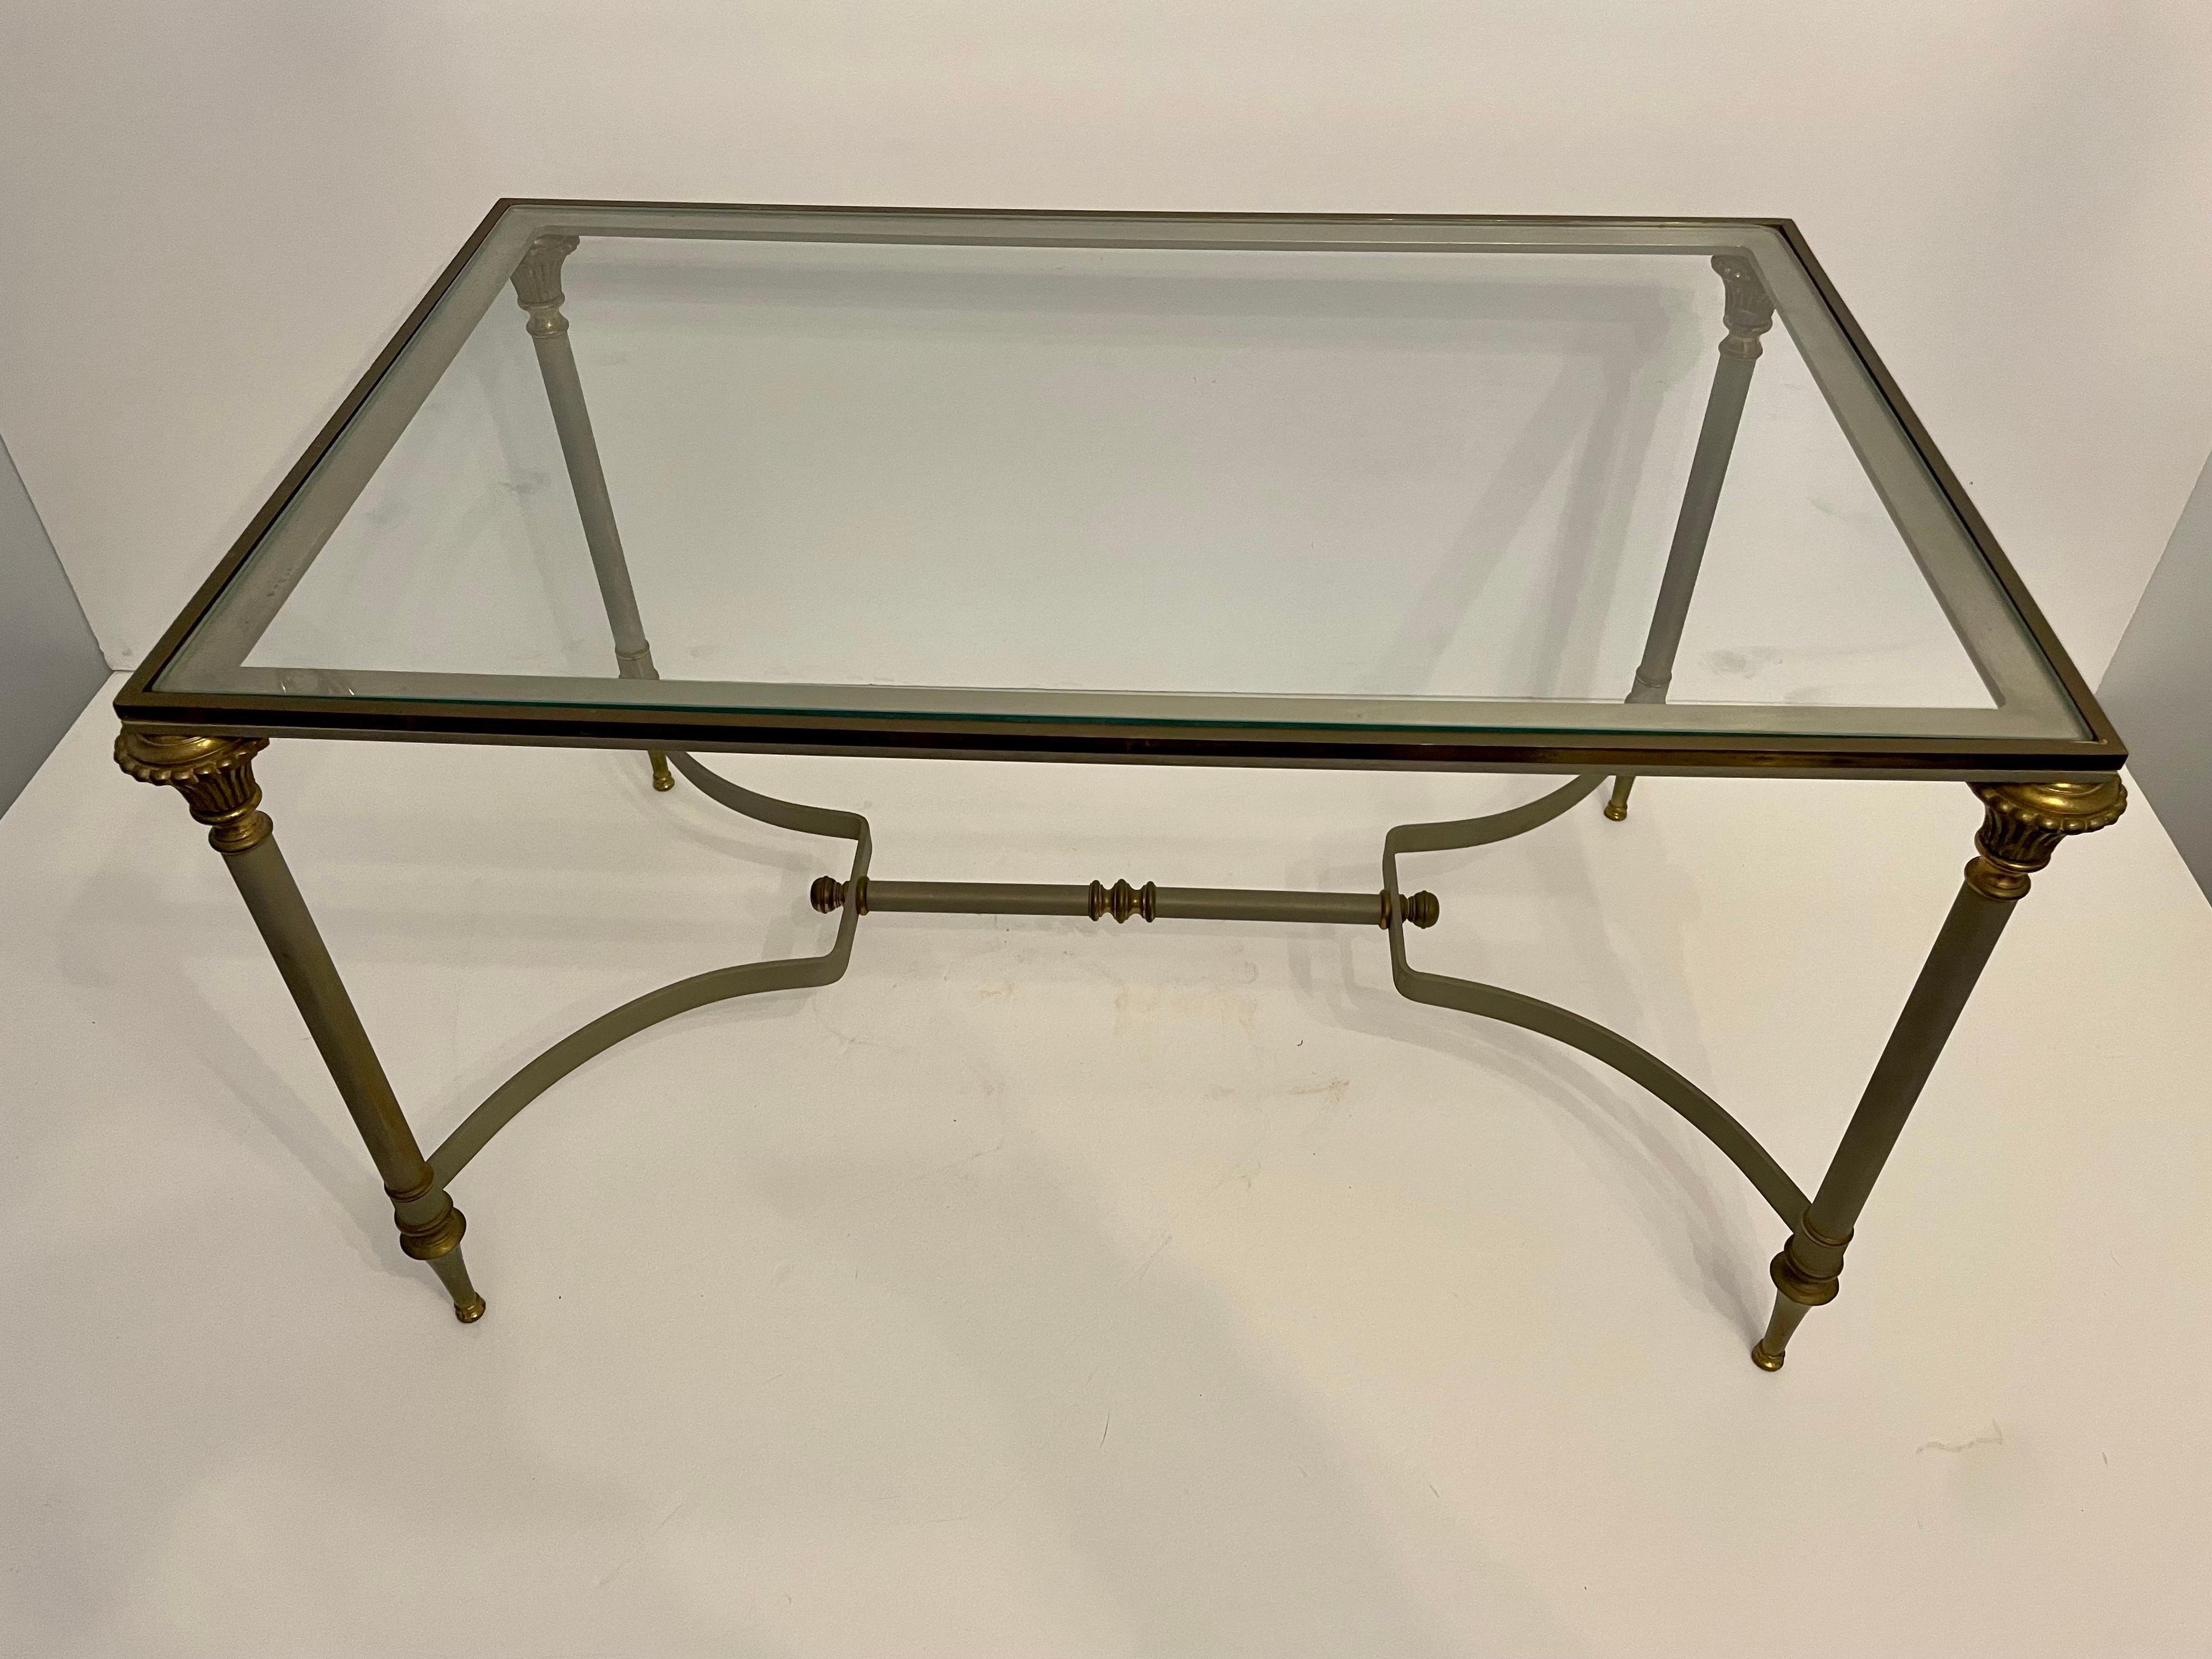 Steel and Brass Maison Jansen Style coffee table with inset glass top. Warm original patina, circa 1960s. 29